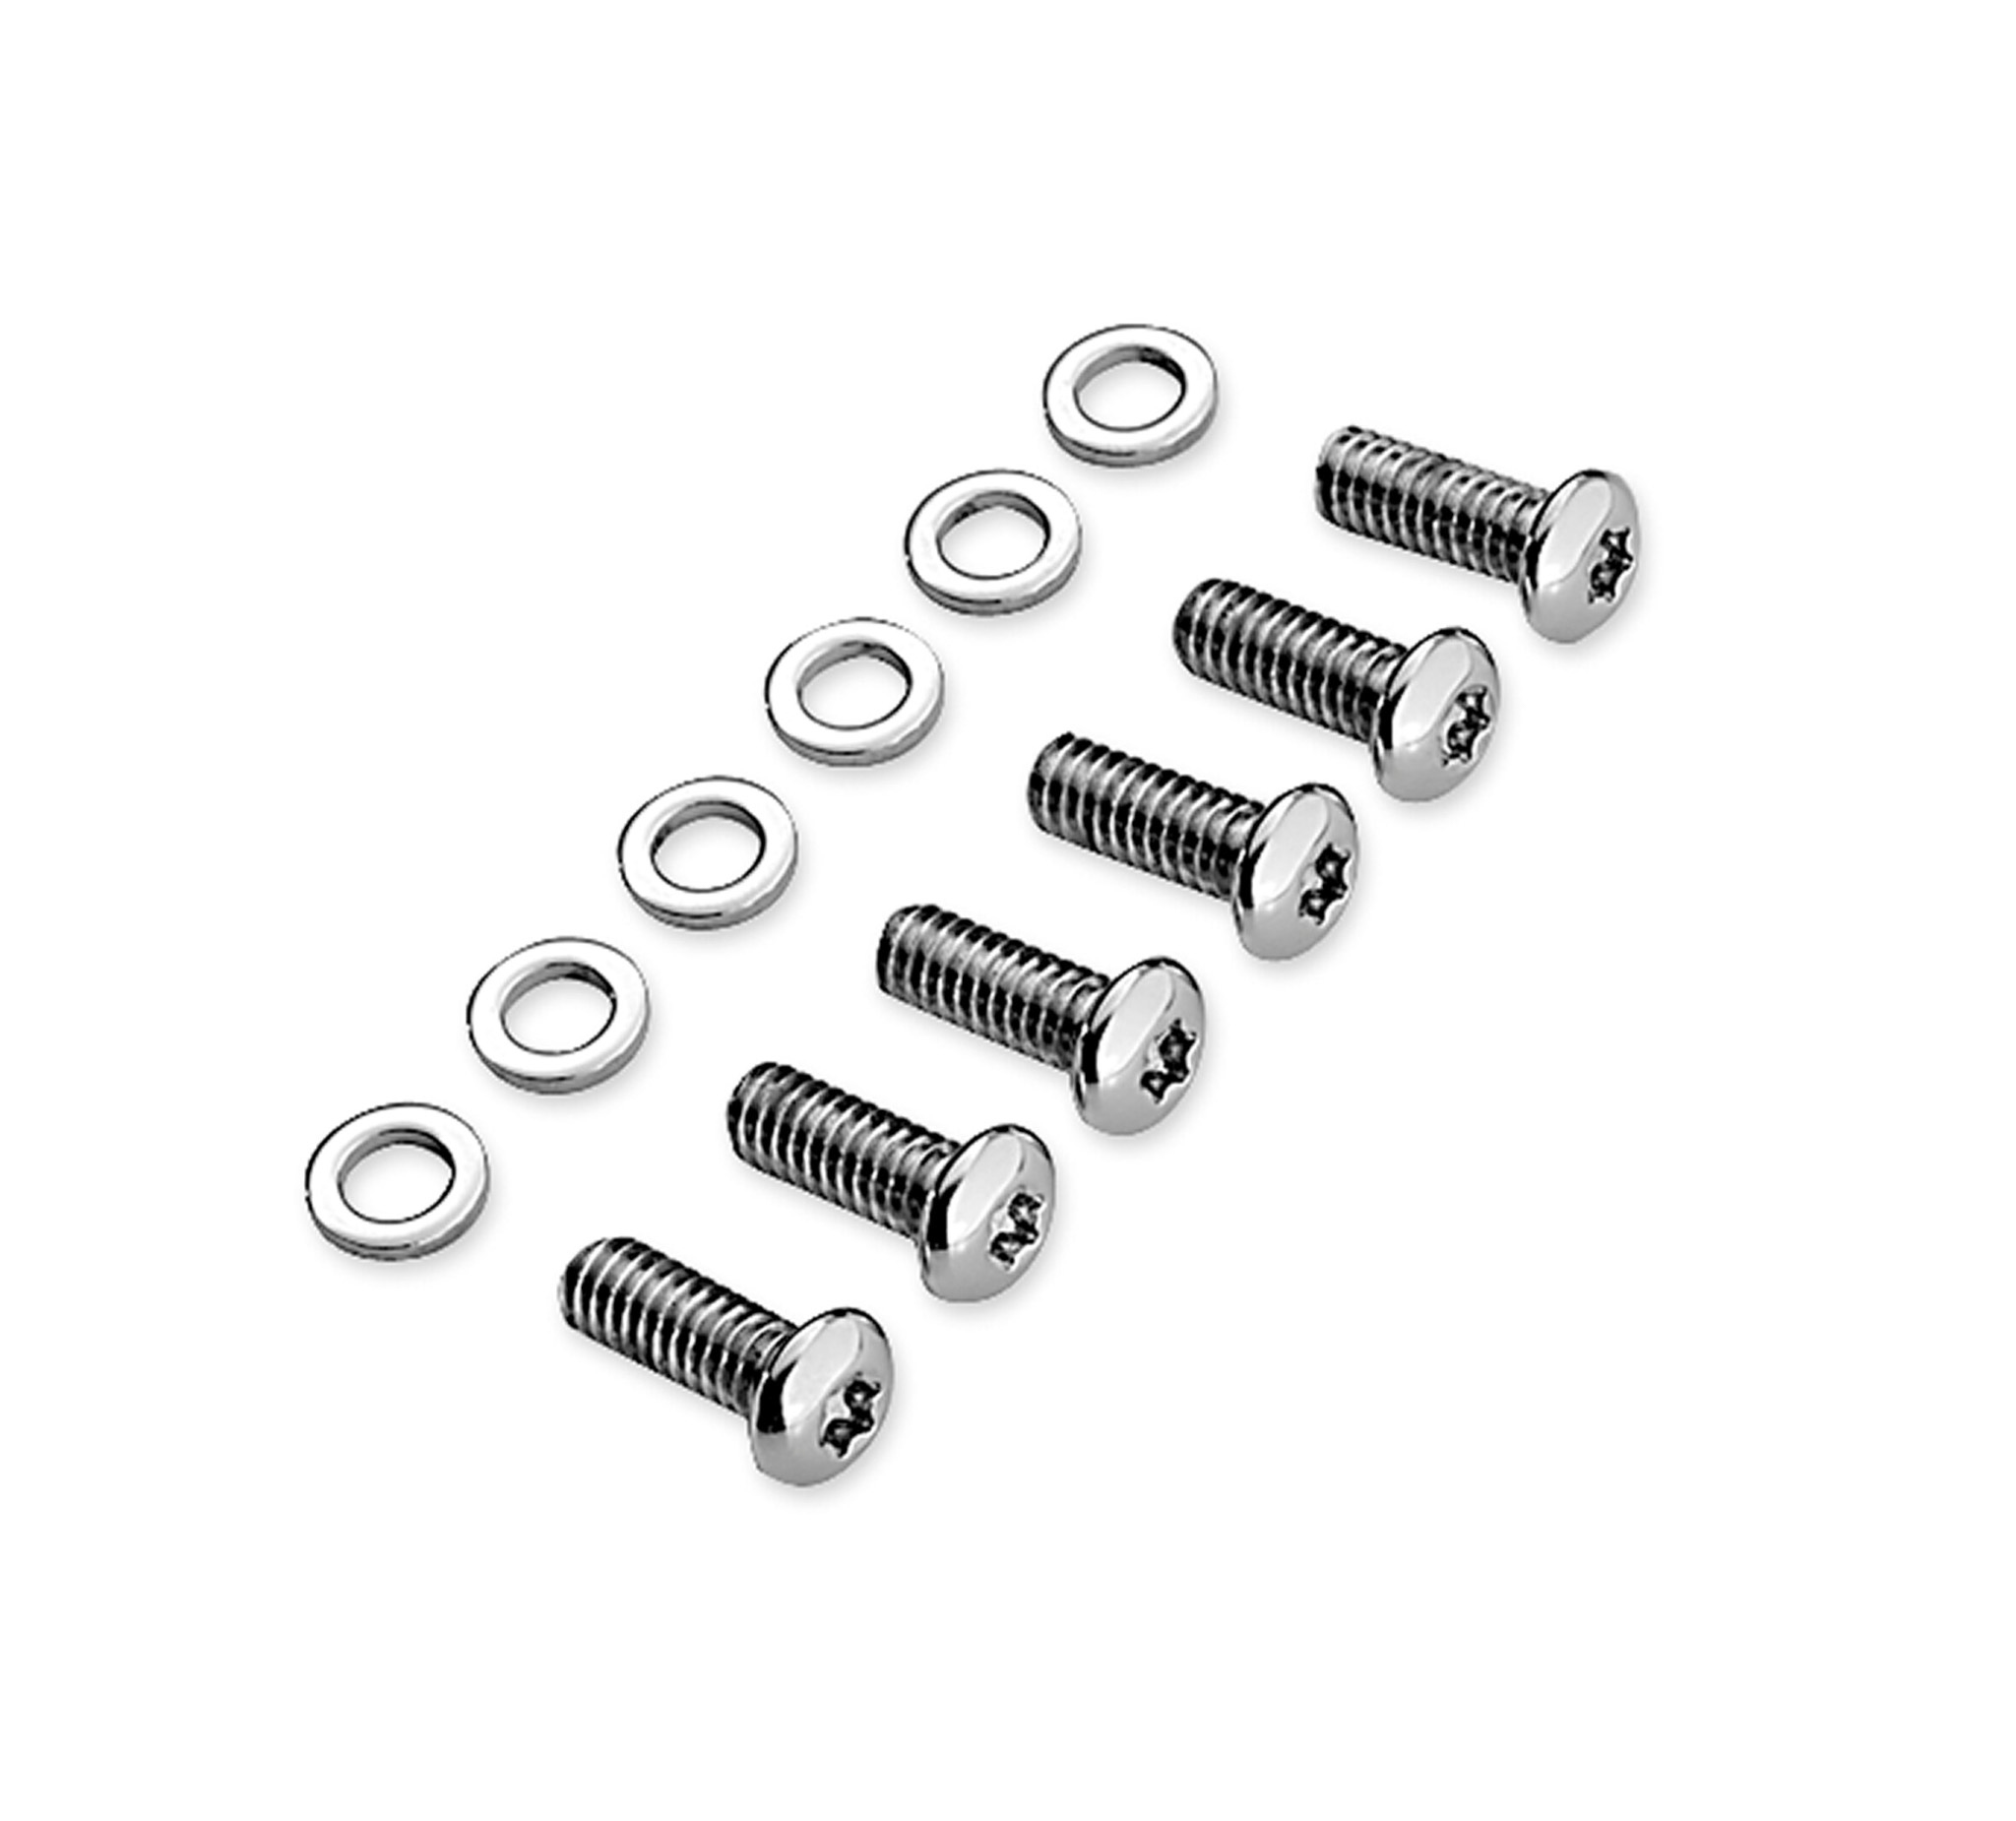 5 Stainless Derby Cover Hardware Allen Bolt Kit for 99-2017 Harley Primary Point